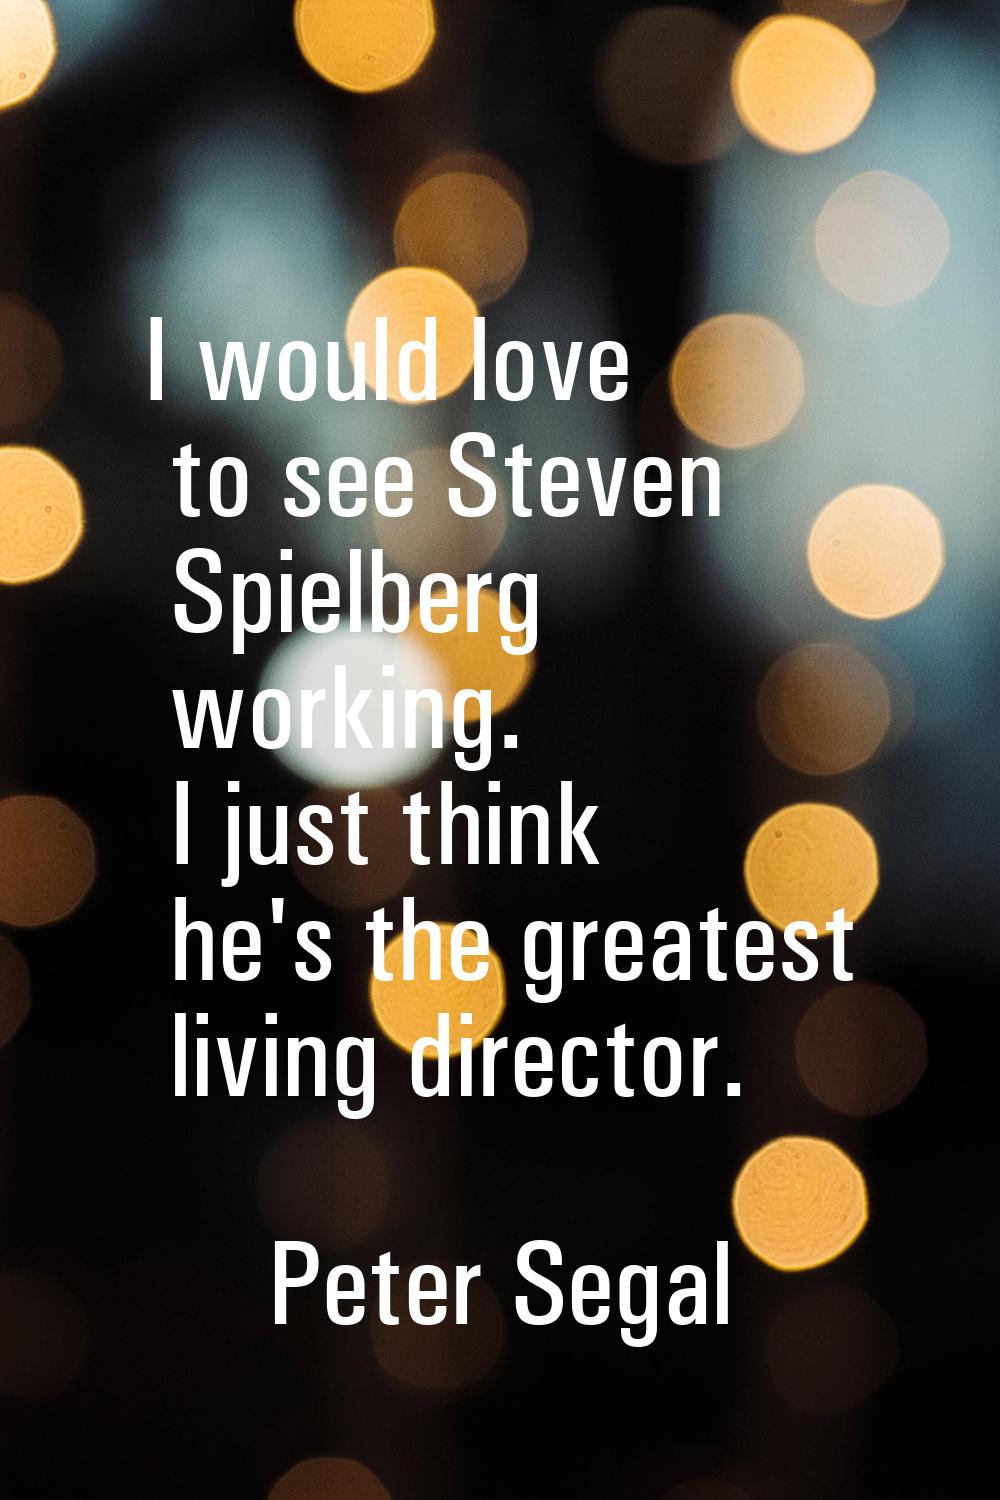 I would love to see Steven Spielberg working. I just think he's the greatest living director.